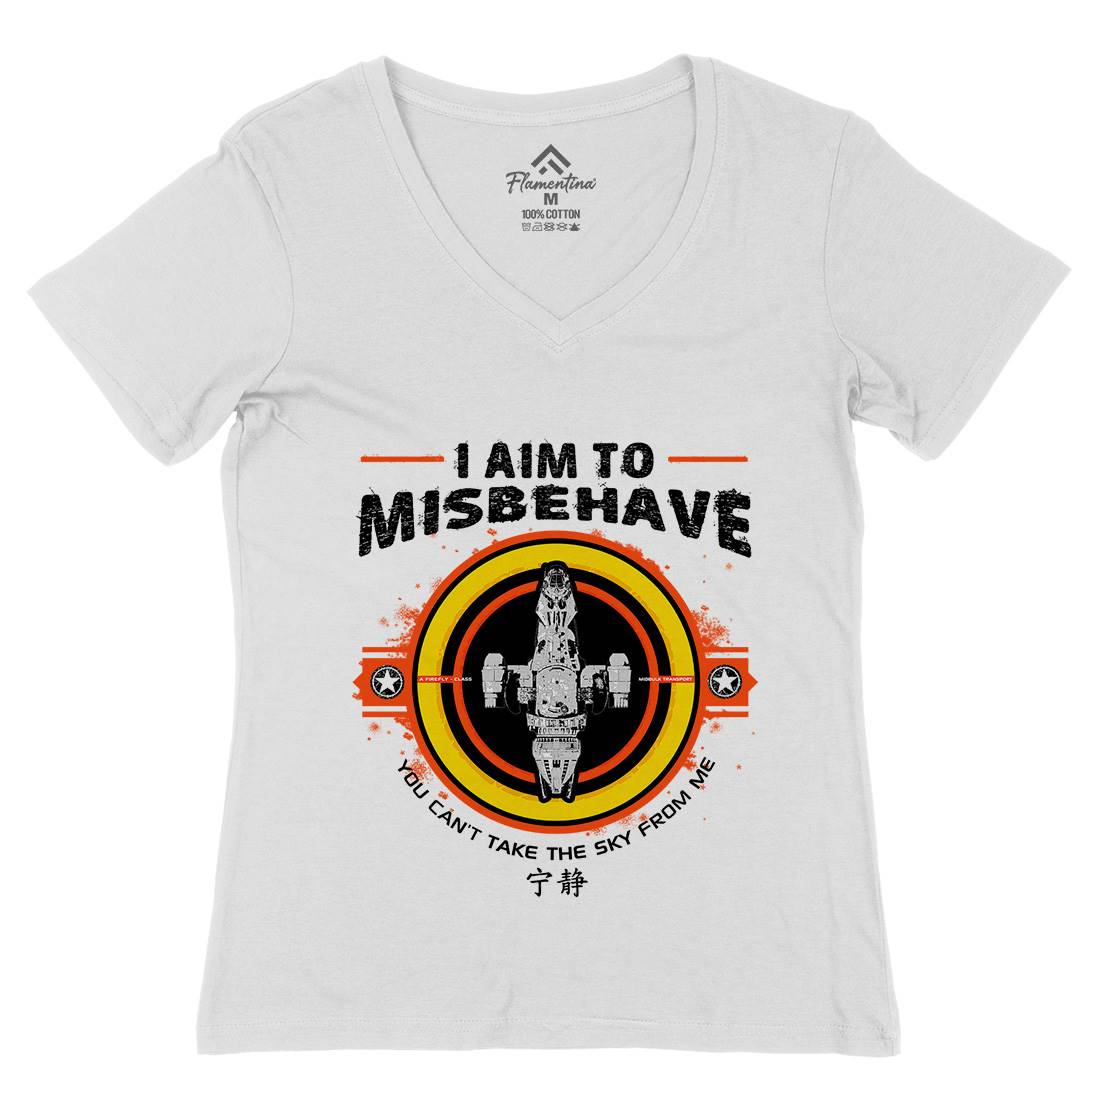 I Aim To Misbehave Womens Organic V-Neck T-Shirt Space D352